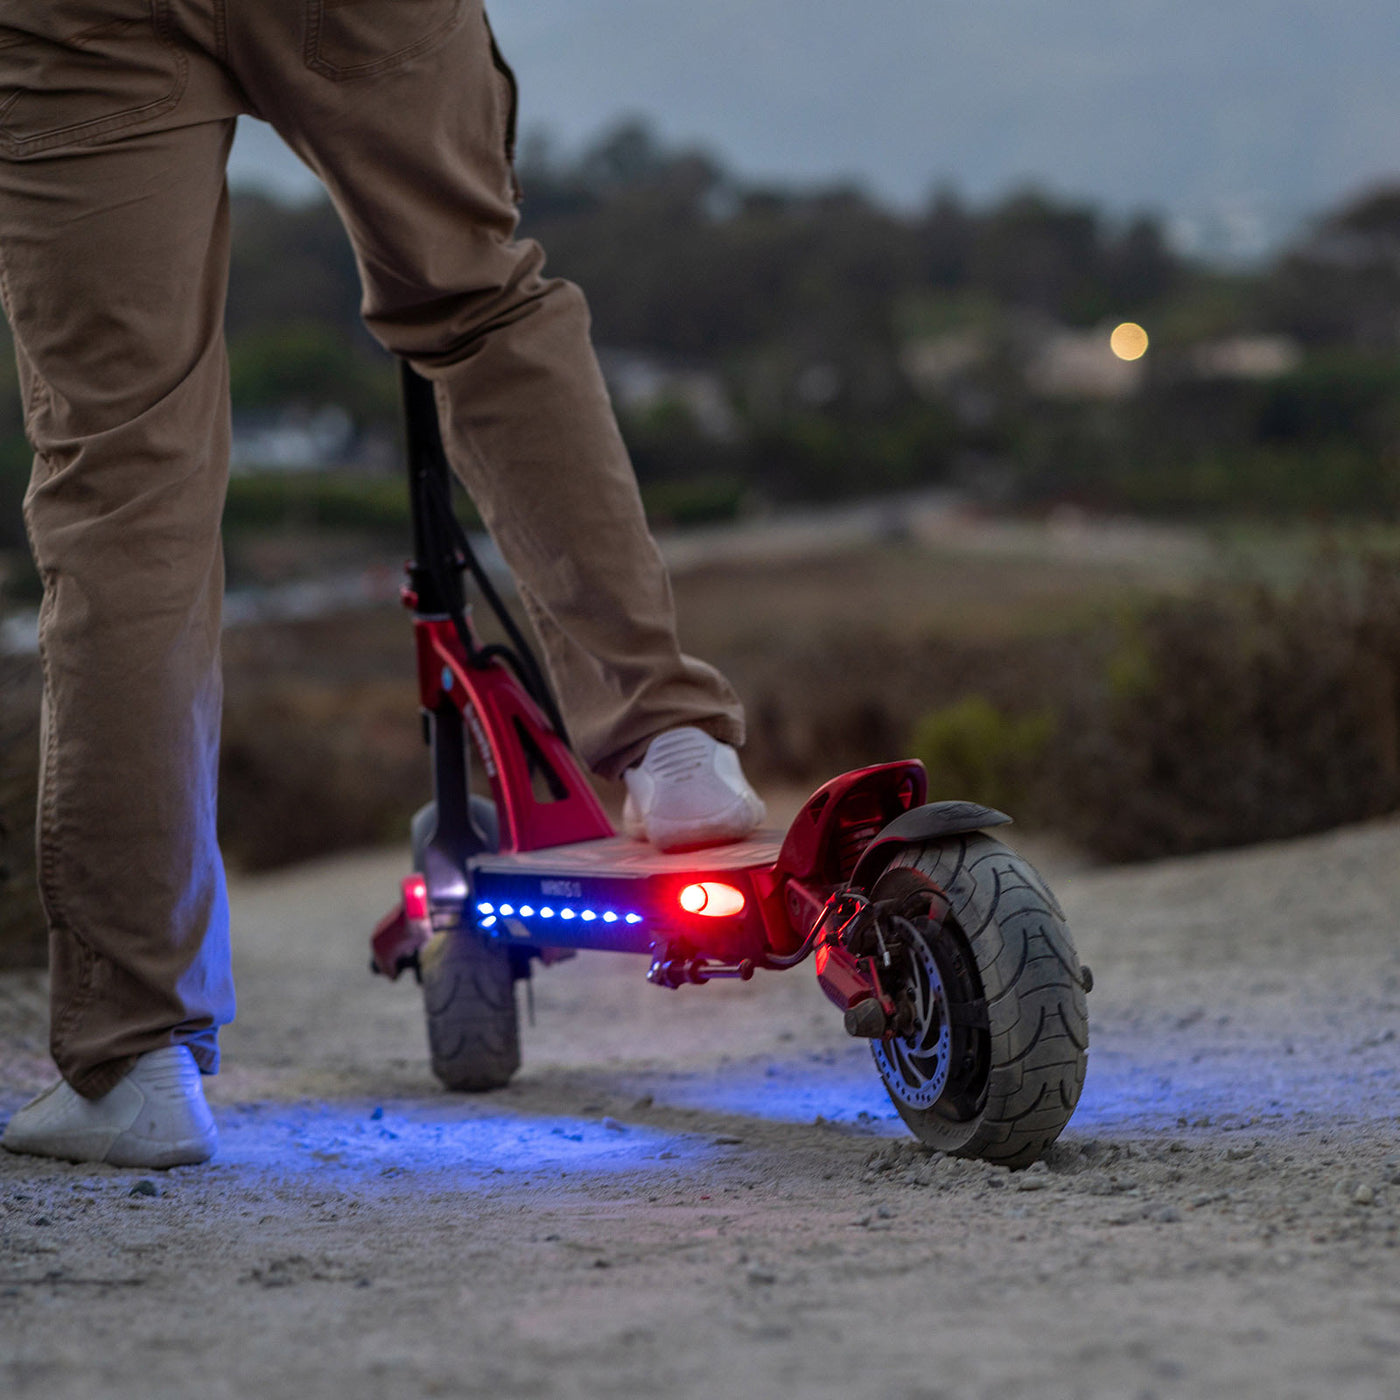 Evening ride showcasing the LED lights of the Kaabo USA Mantis 10 Lite Electric Scooter